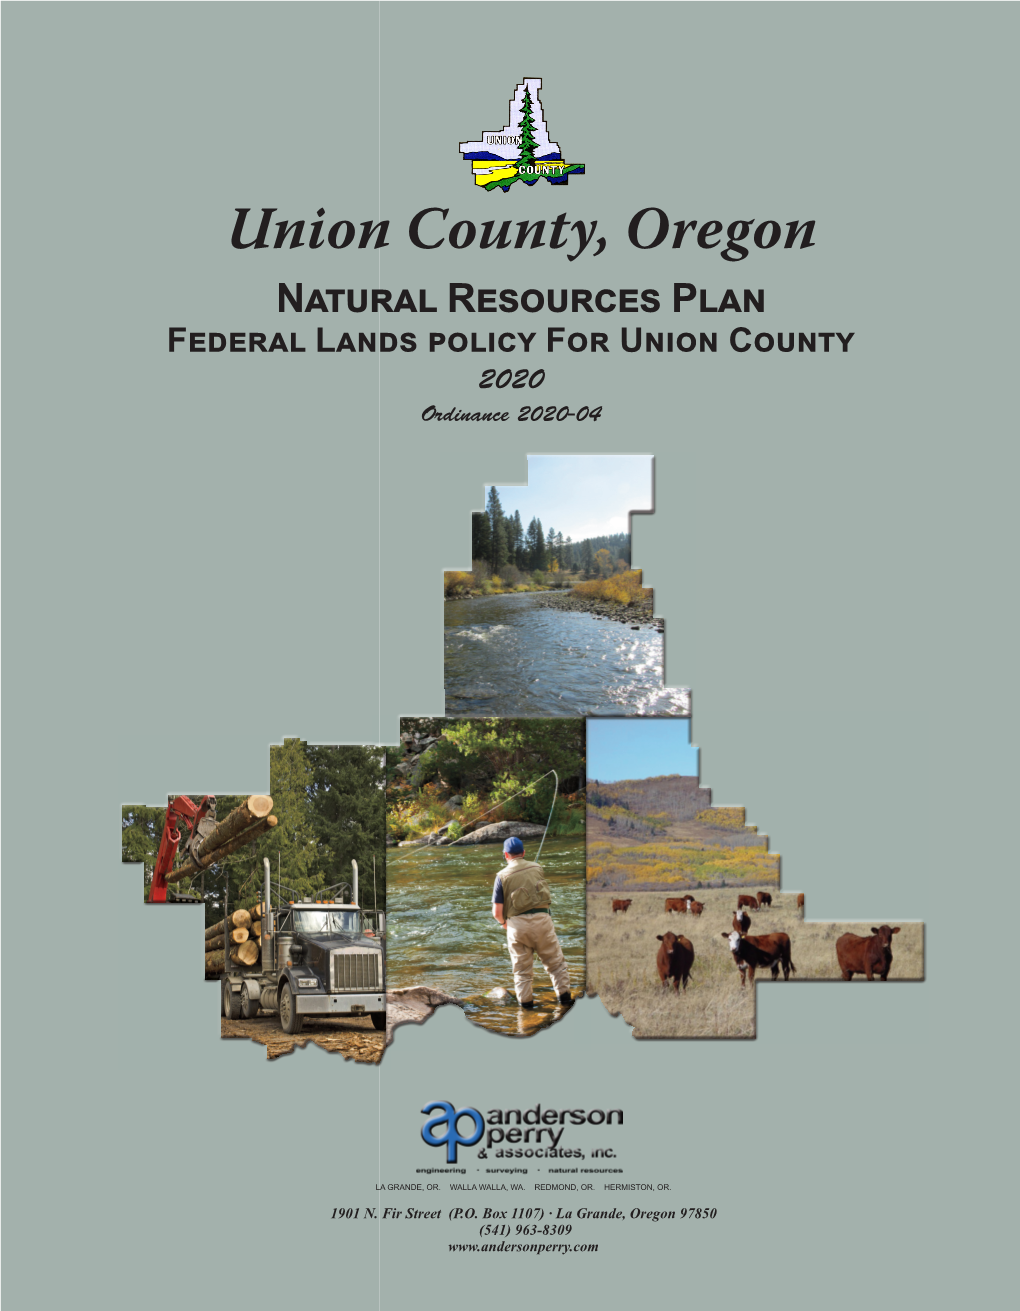 Union County, Oregon Natural Resources Plan Federal Lands Policy for Union County 2020 Ordinance 2020-04